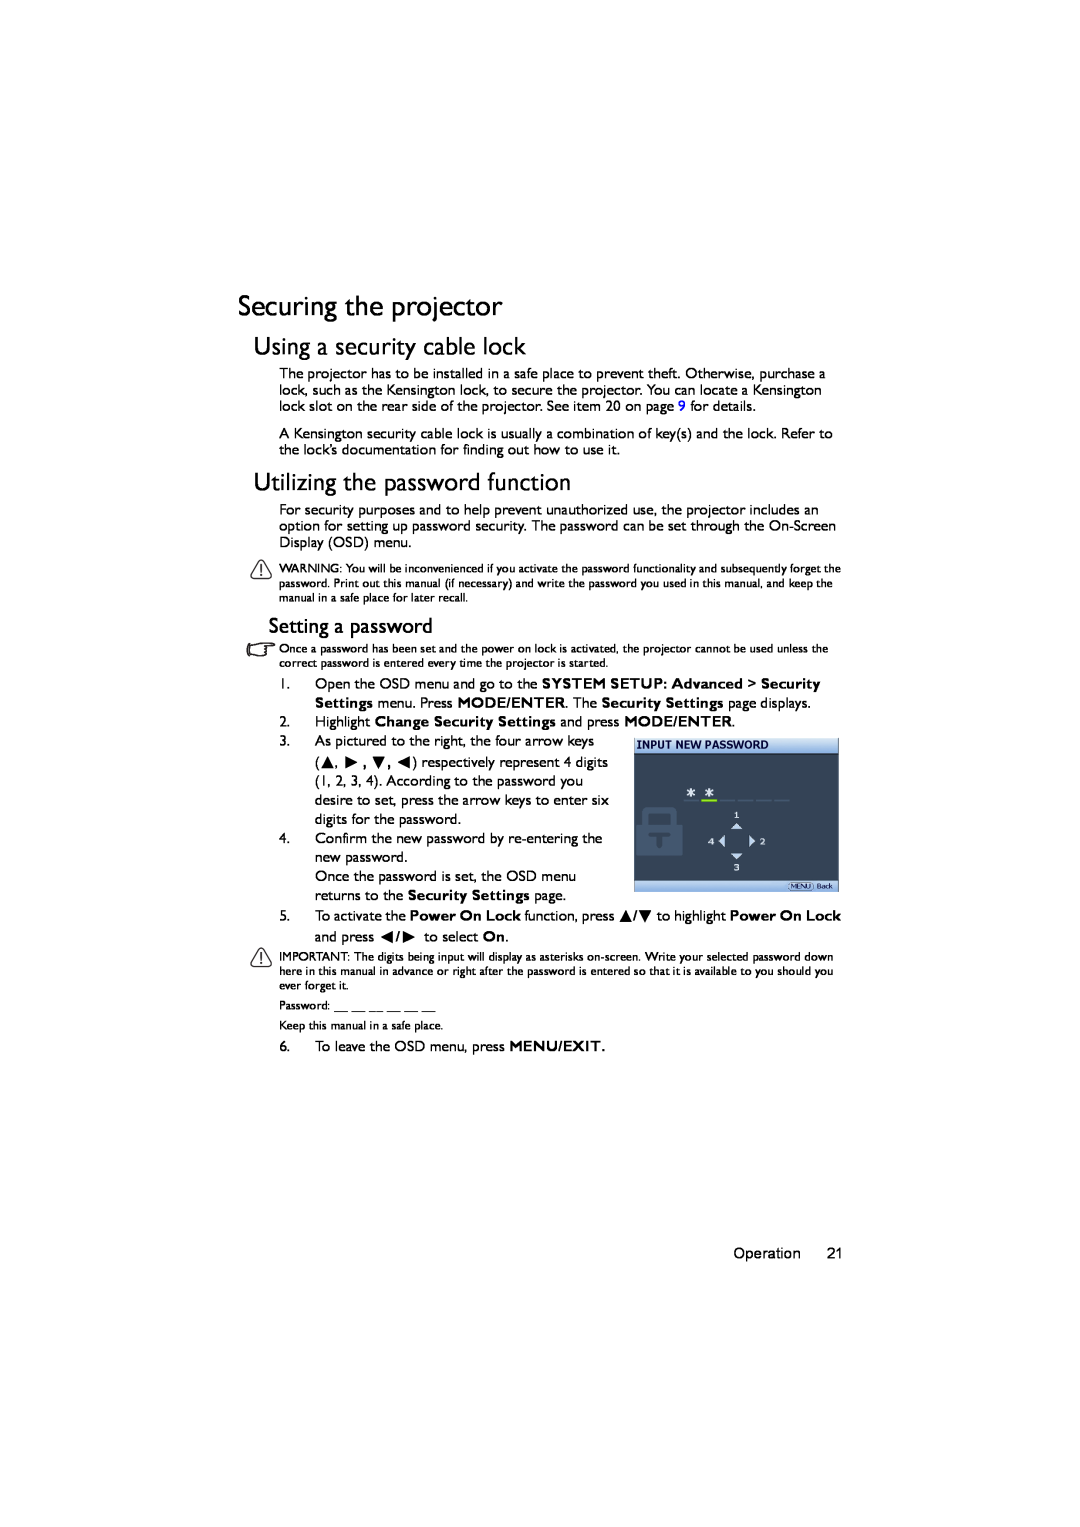 BenQ MX503, MS502 Securing the projector, Using a security cable lock, Utilizing the password function, Setting a password 